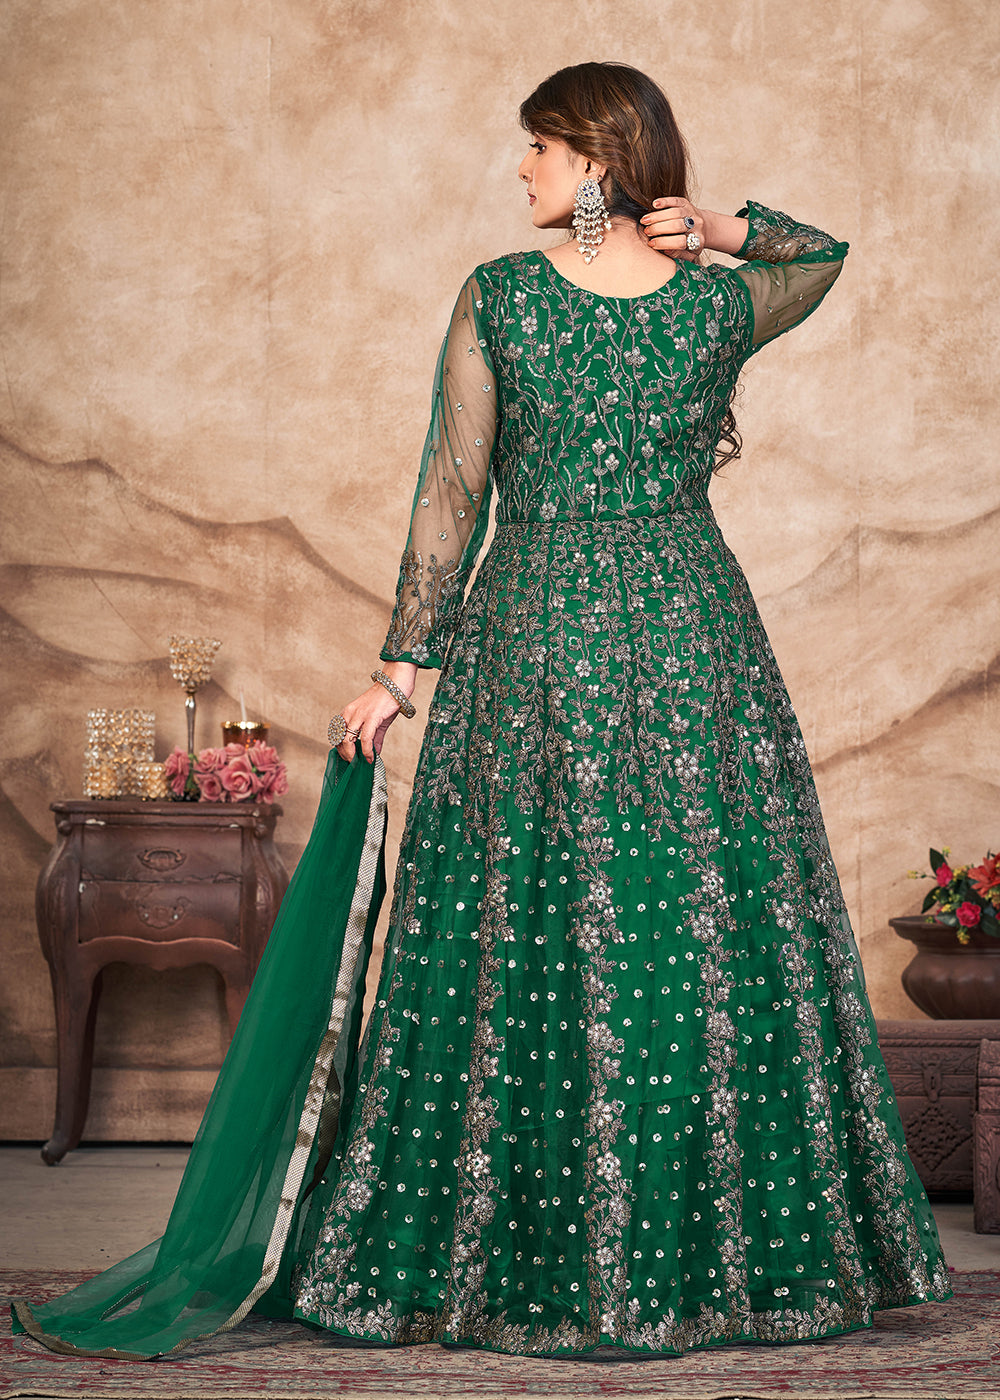 Buy Now Emerald Green Net Embroidered Pant Style Anarkali Suit Online in USA, UK, Australia, New Zealand, Canada & Worldwide at Empress Clothing. 